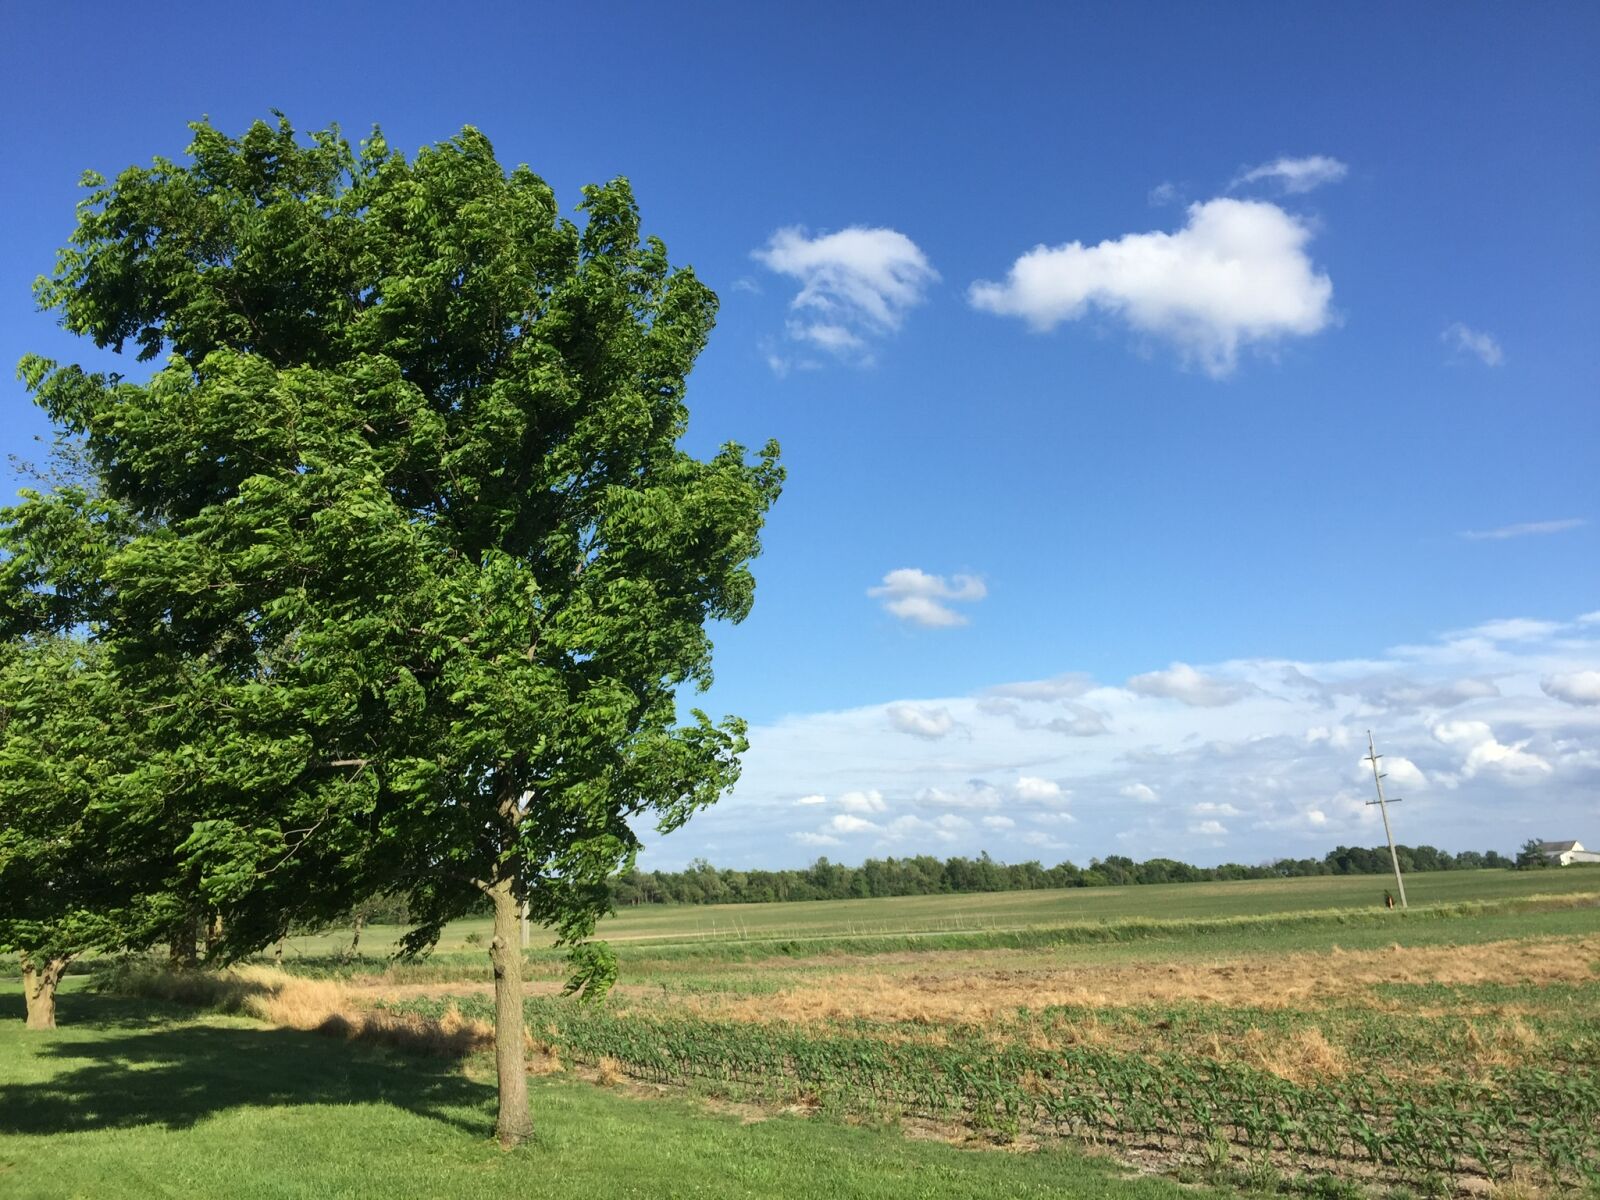 Apple iPhone 6 sample photo. Country, farm, grasslands, tree photography